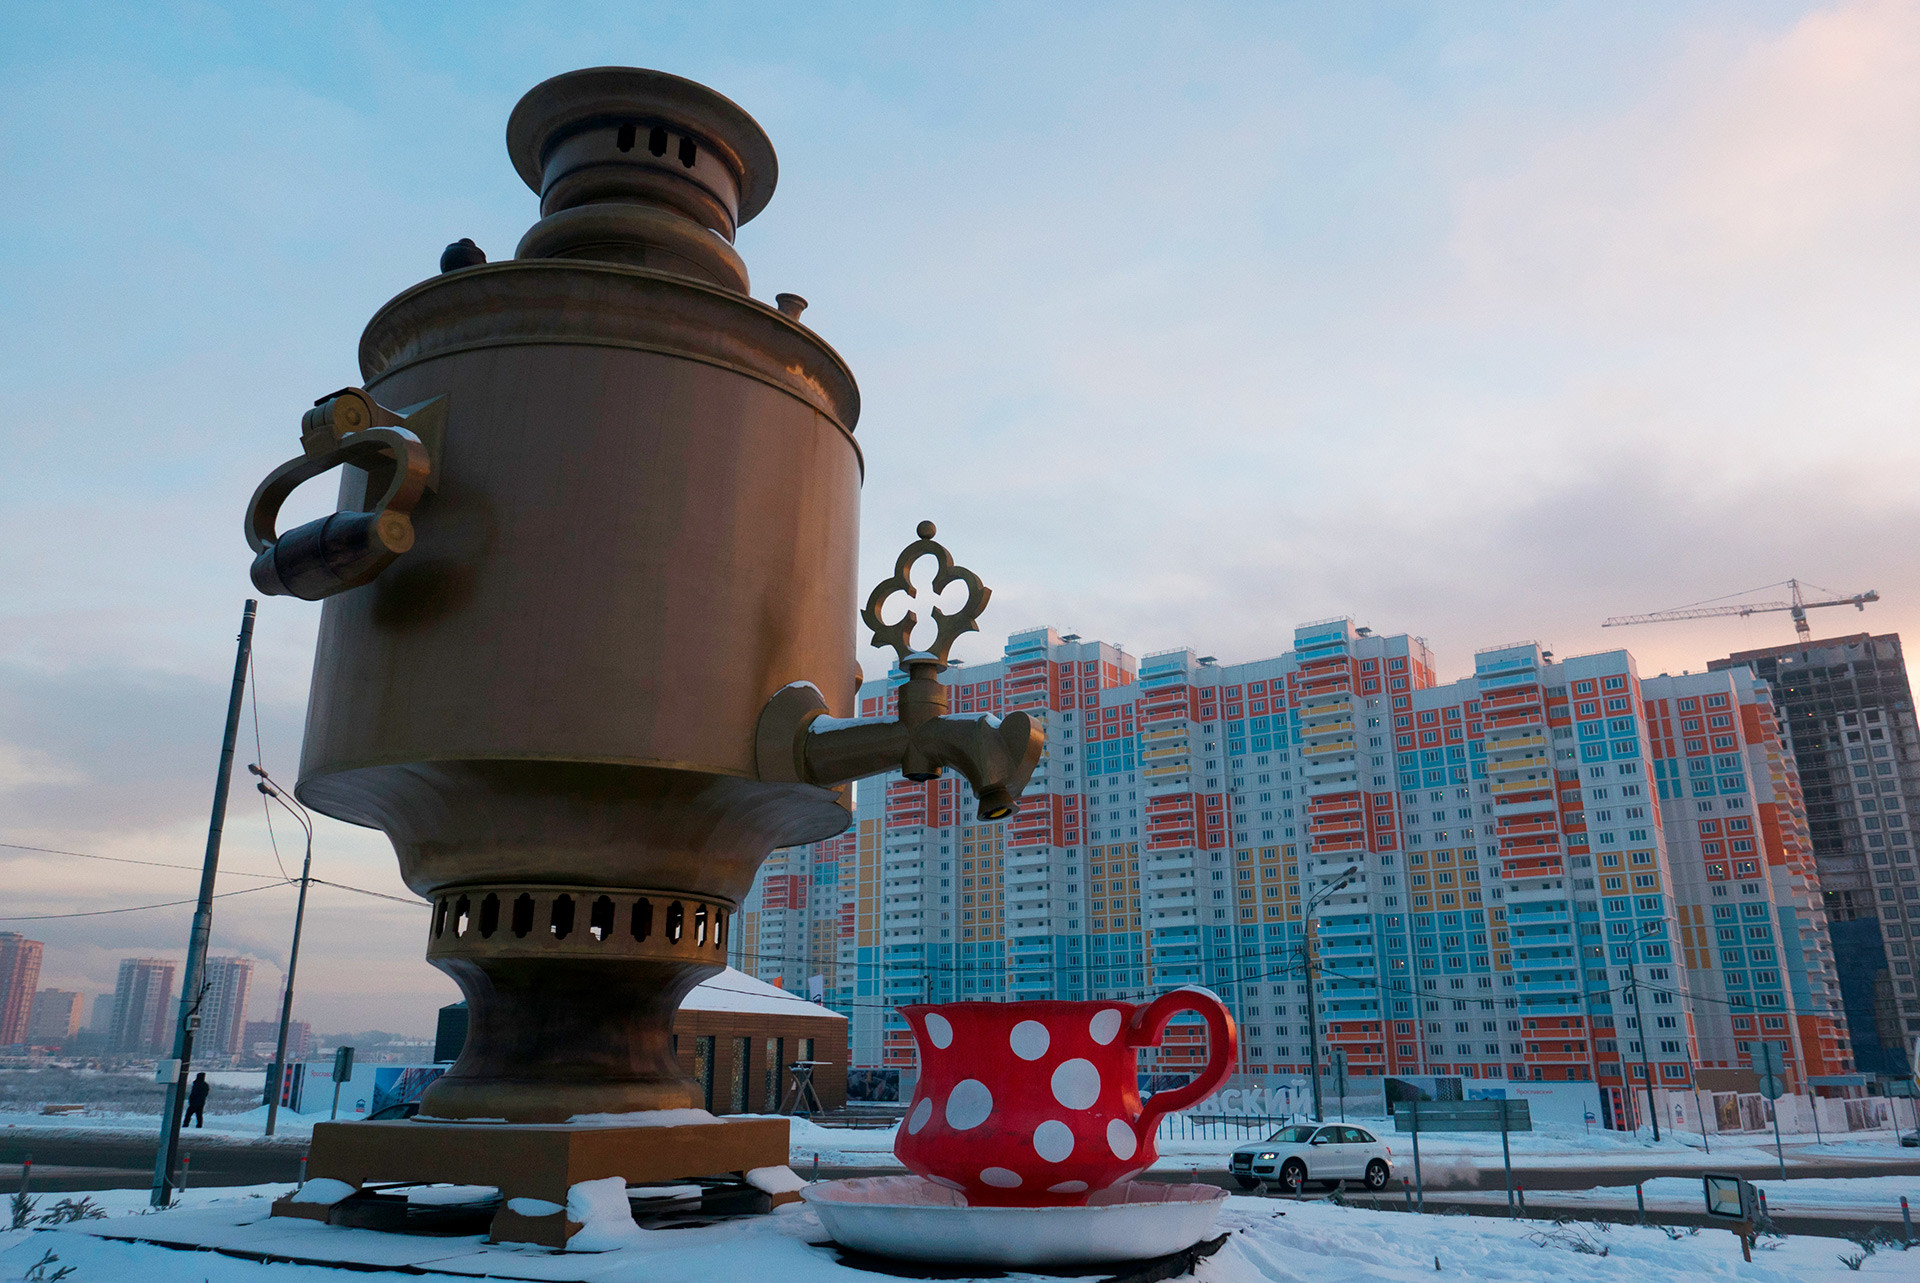 The eight-meter sculpture of a samovar in the city of Mytischi, Moscow Region.